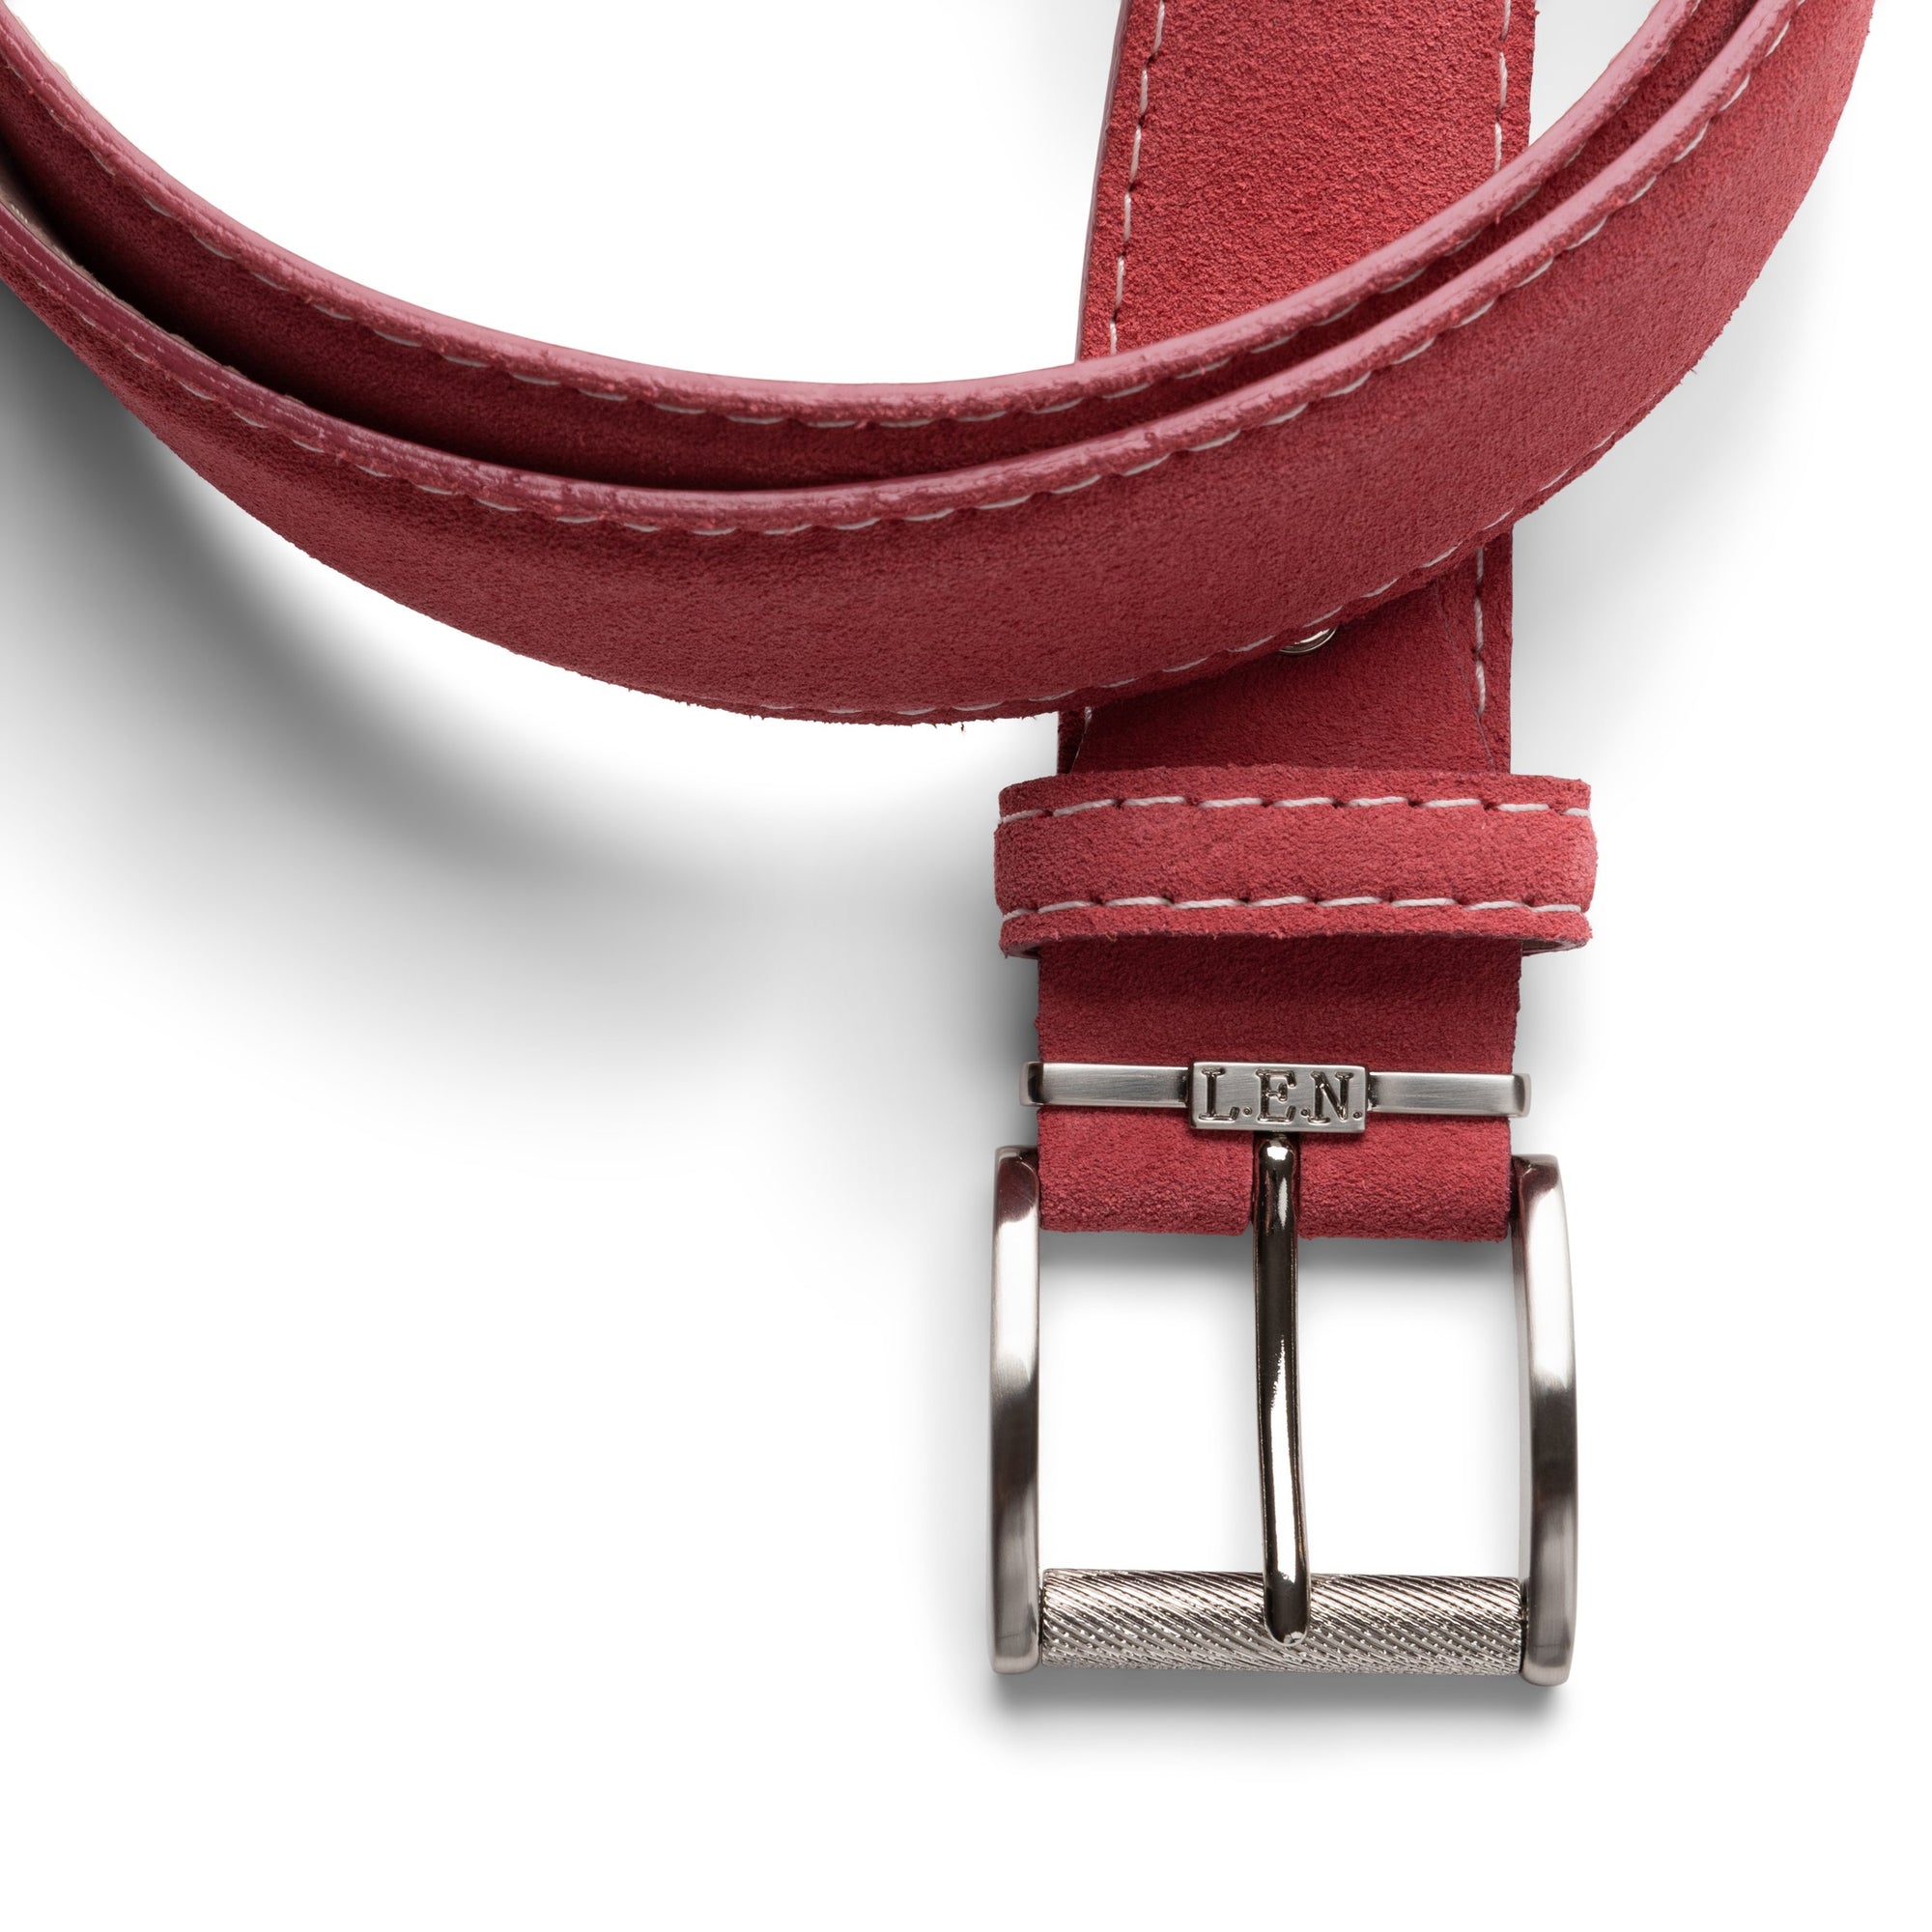 Italian Suede Belt in Ruby with White Stitching by L.E.N. Bespoke